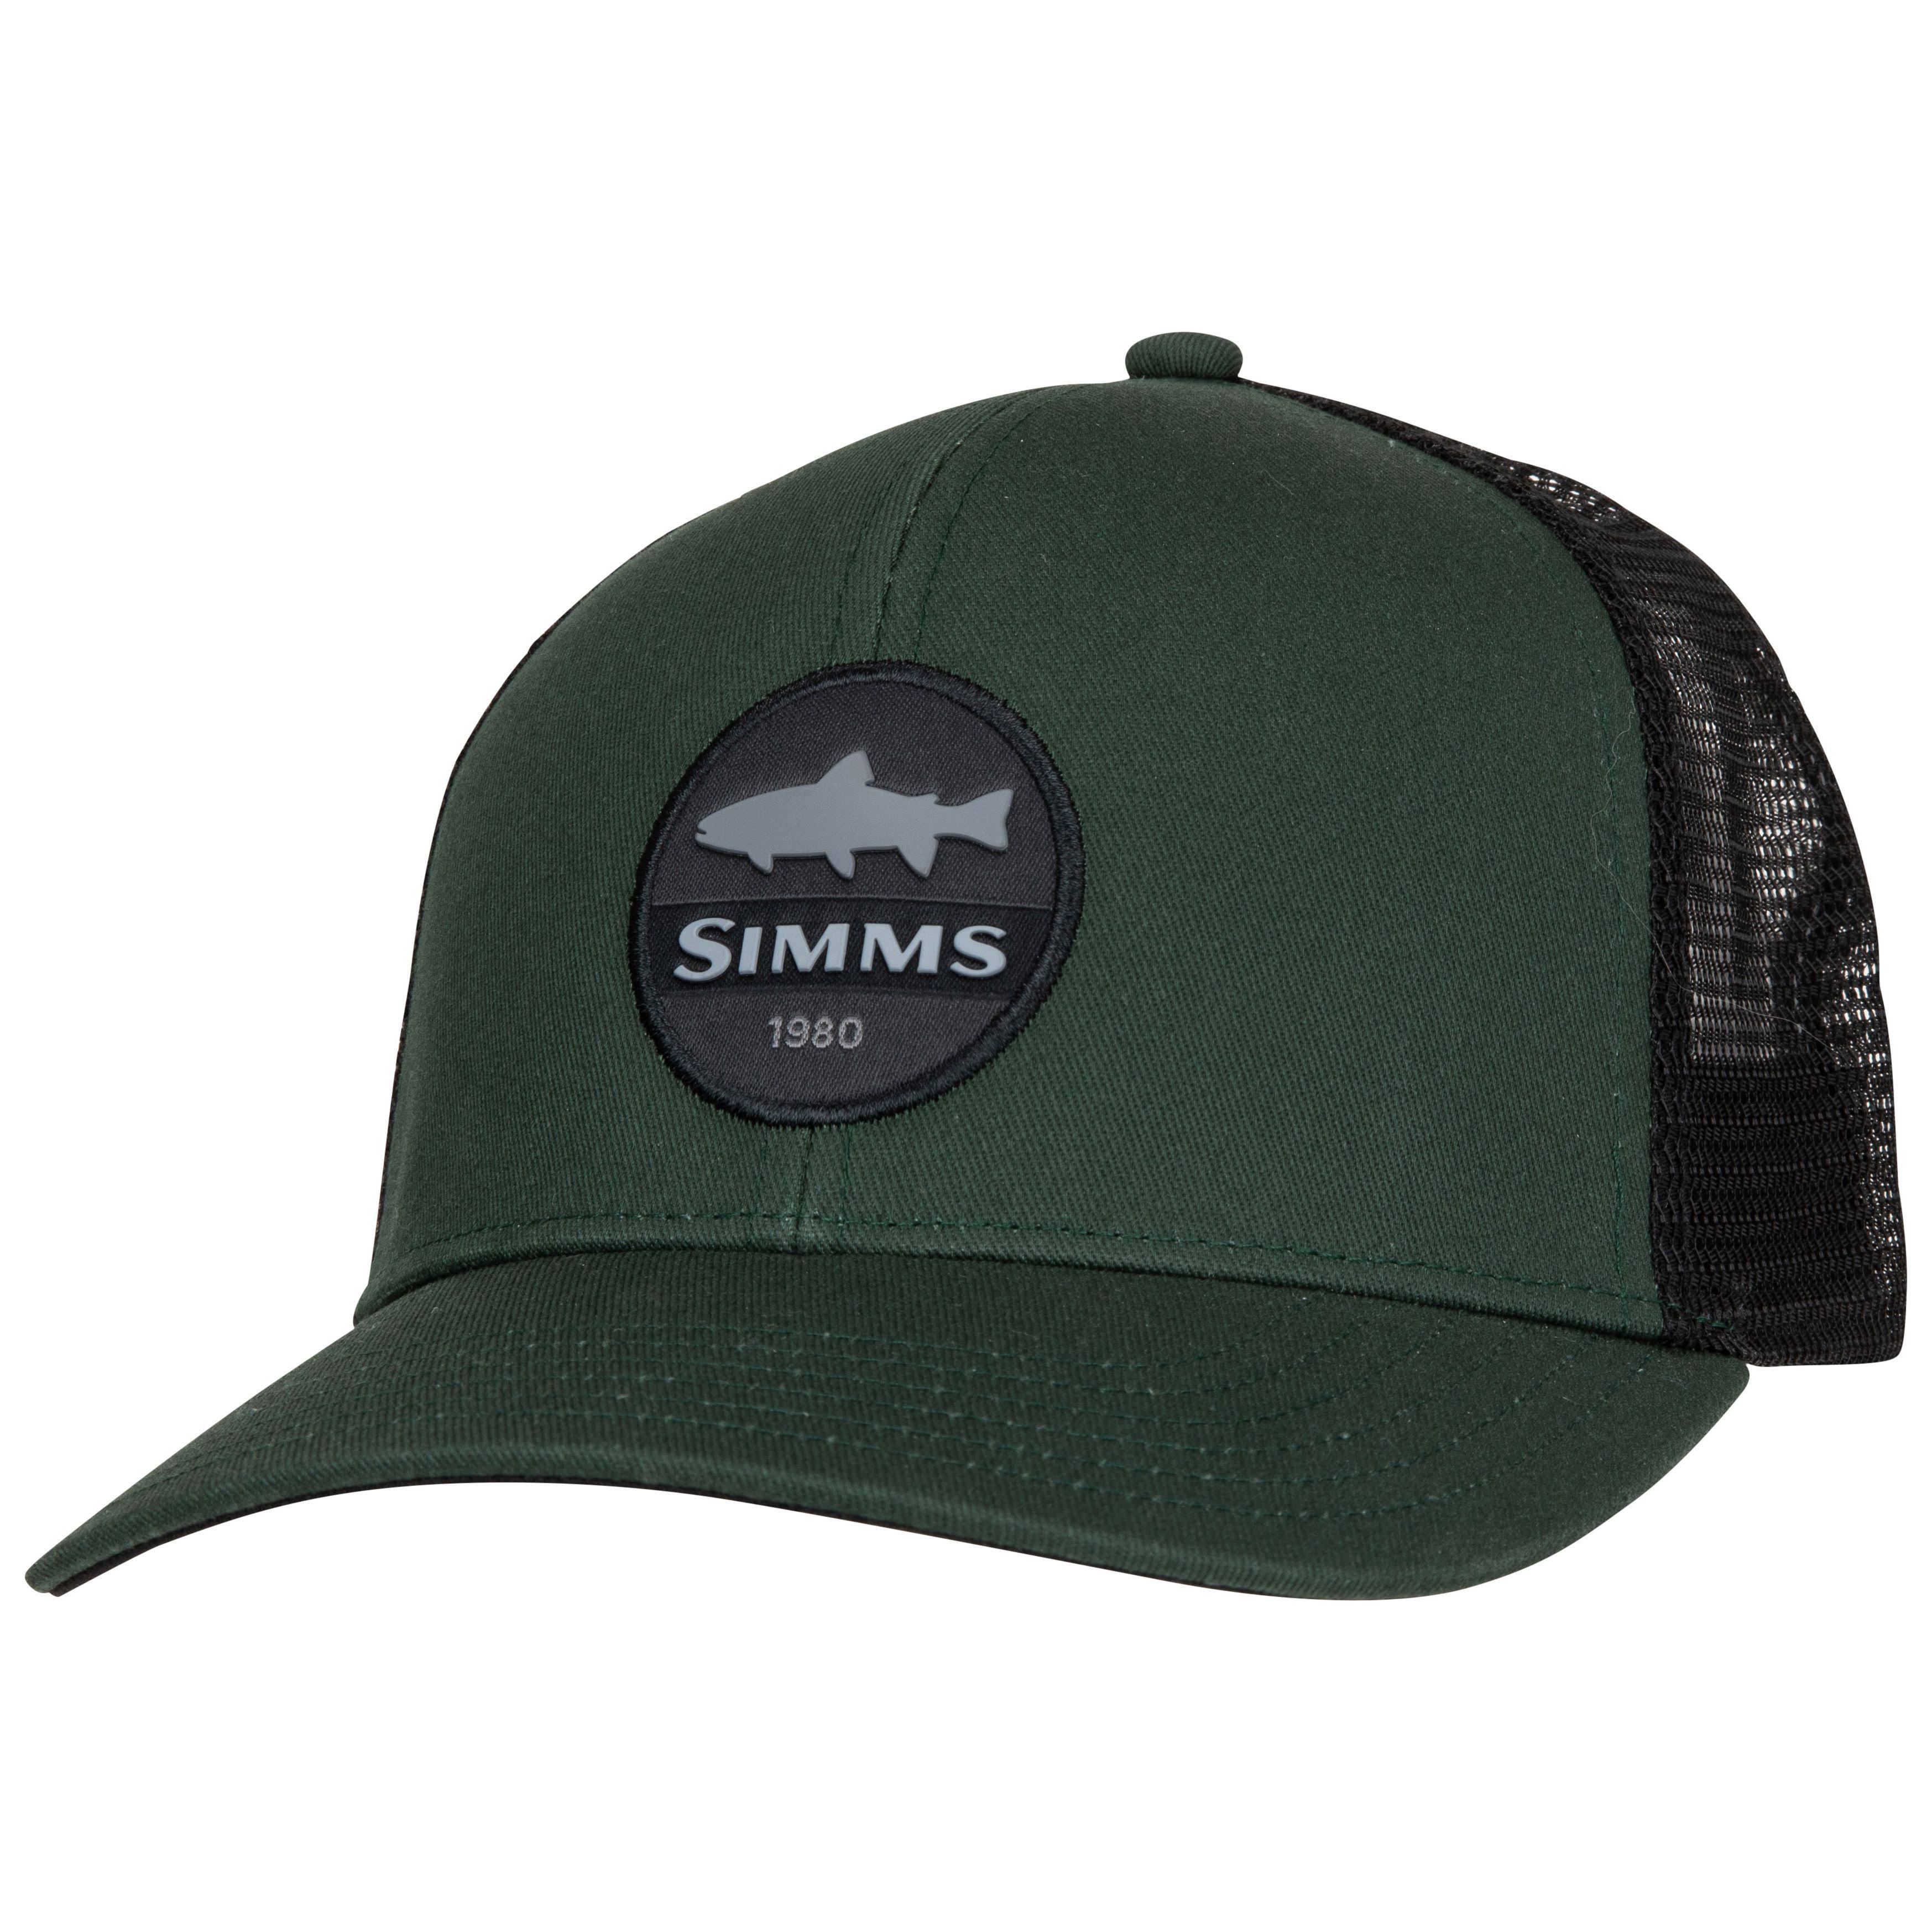 Simms Trout Patch Trucker Hat, Foliage